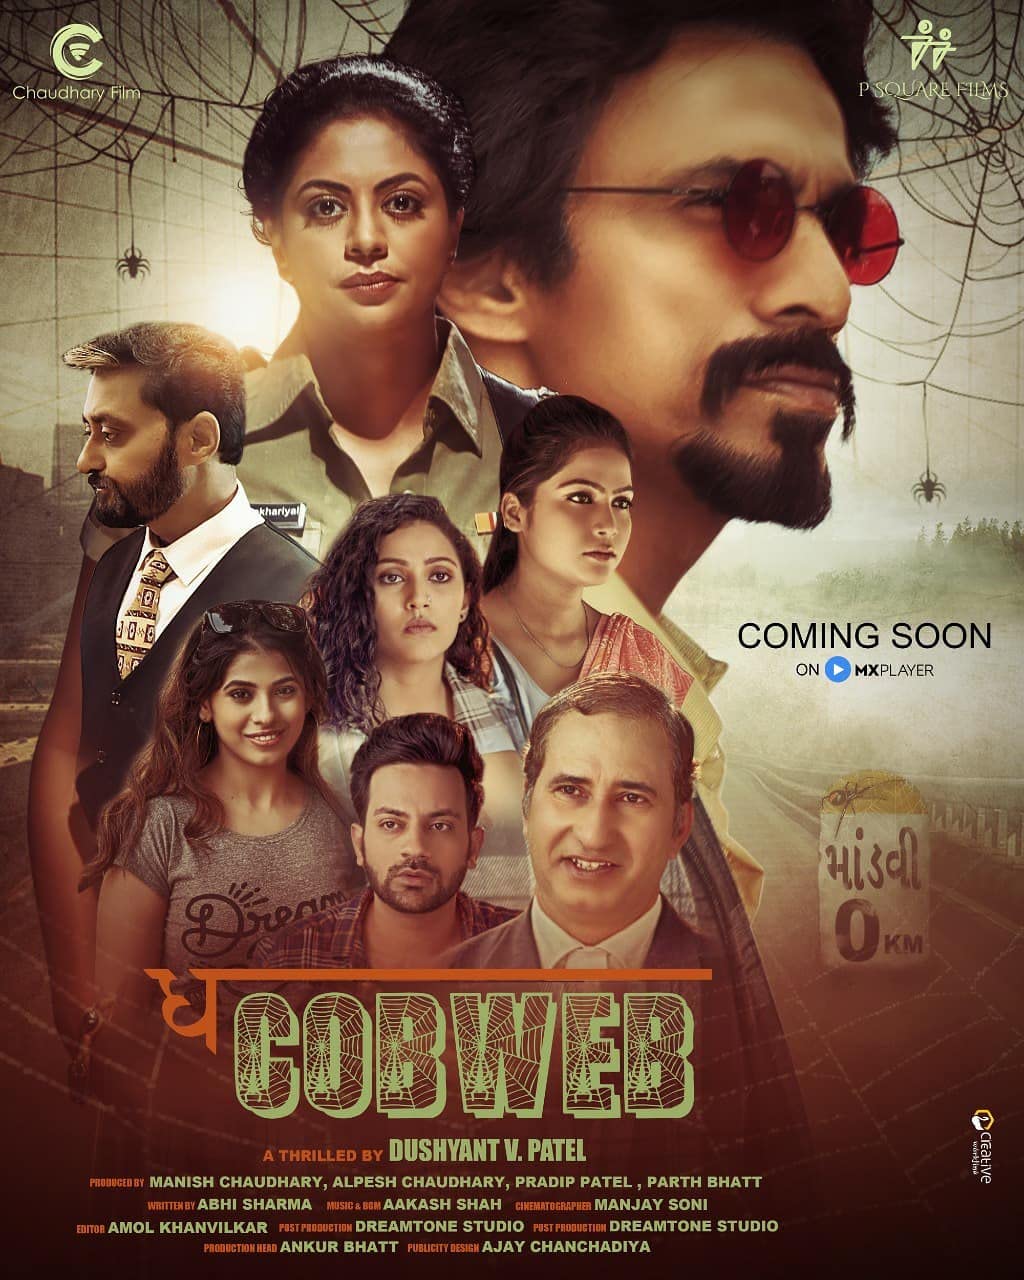 You are currently viewing The Cobweb 2021 Hindi S01 Complete Hot Web Series ESubs 480p HDRip 550MB Download & Watch Online